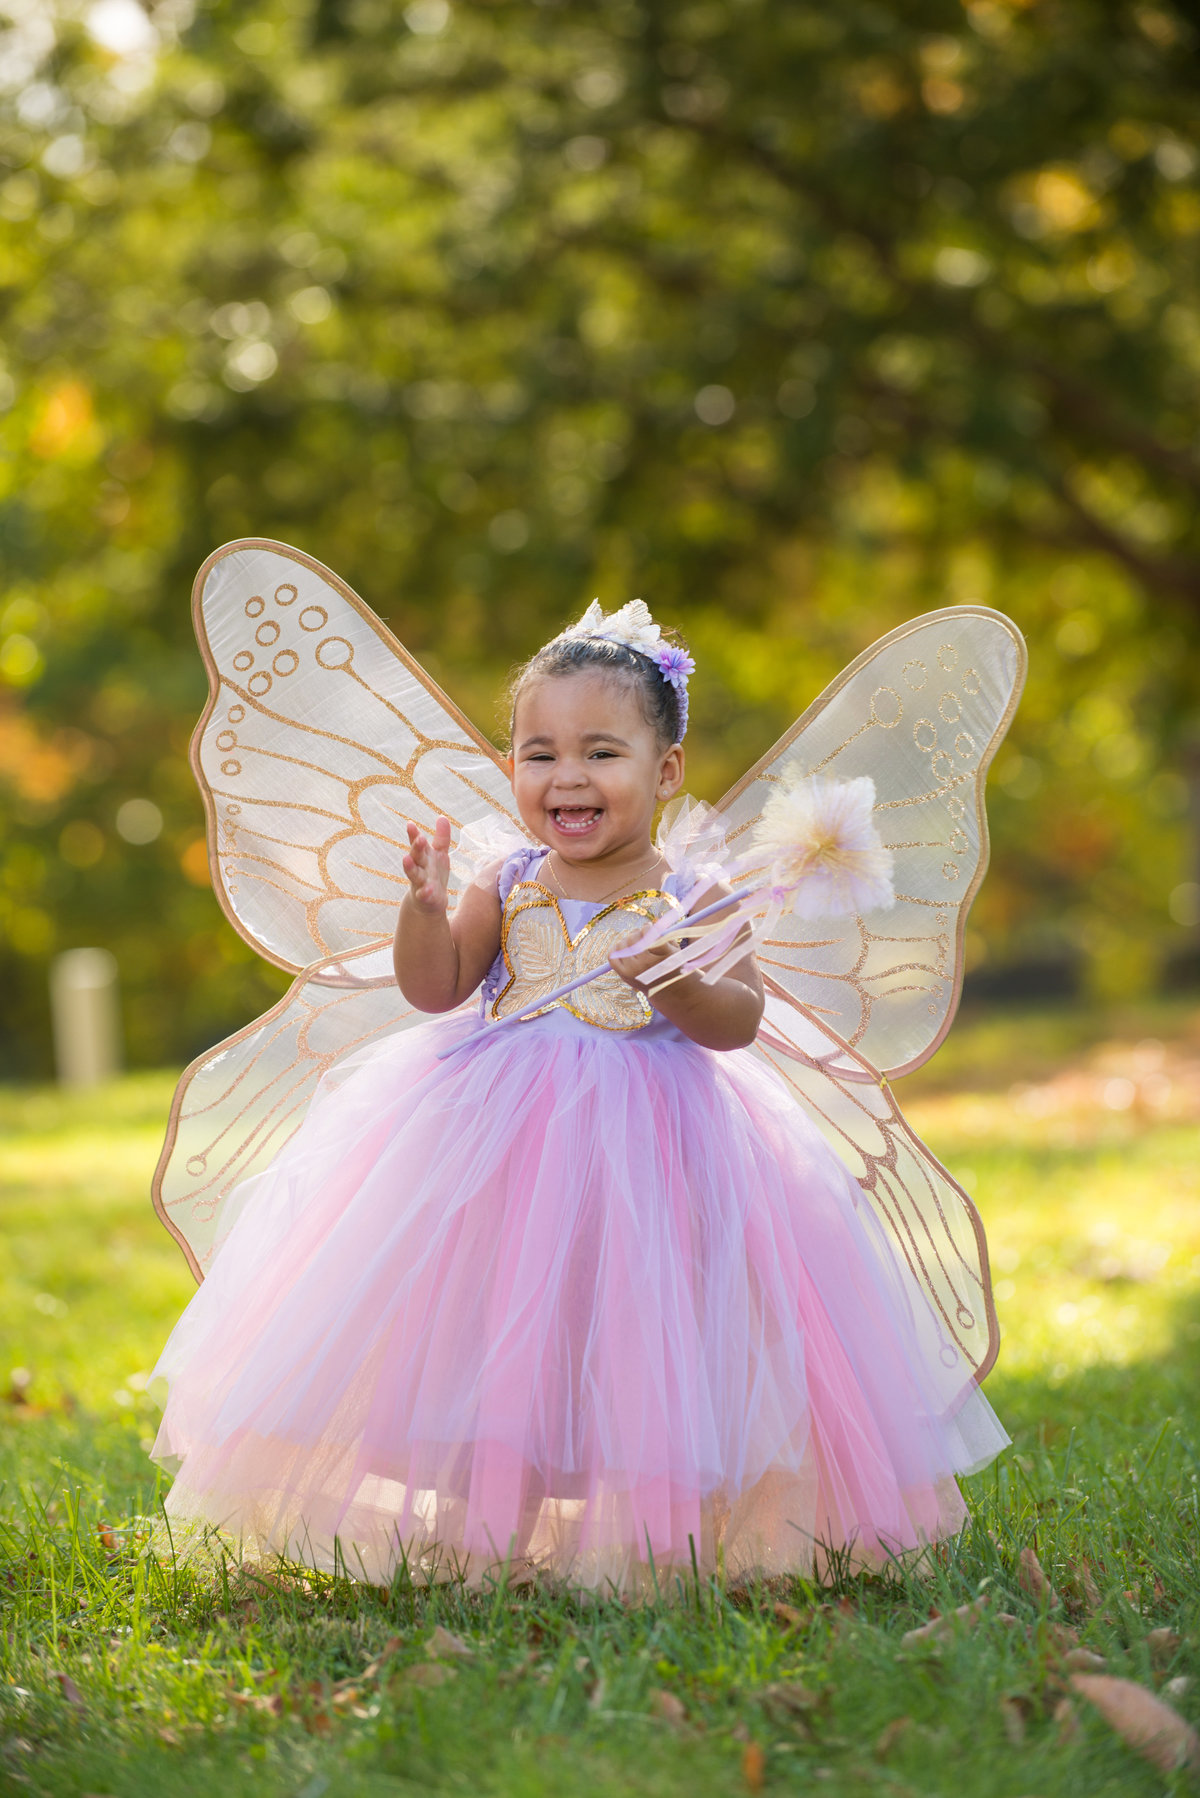 Capturing special birthday moments through childrens photography